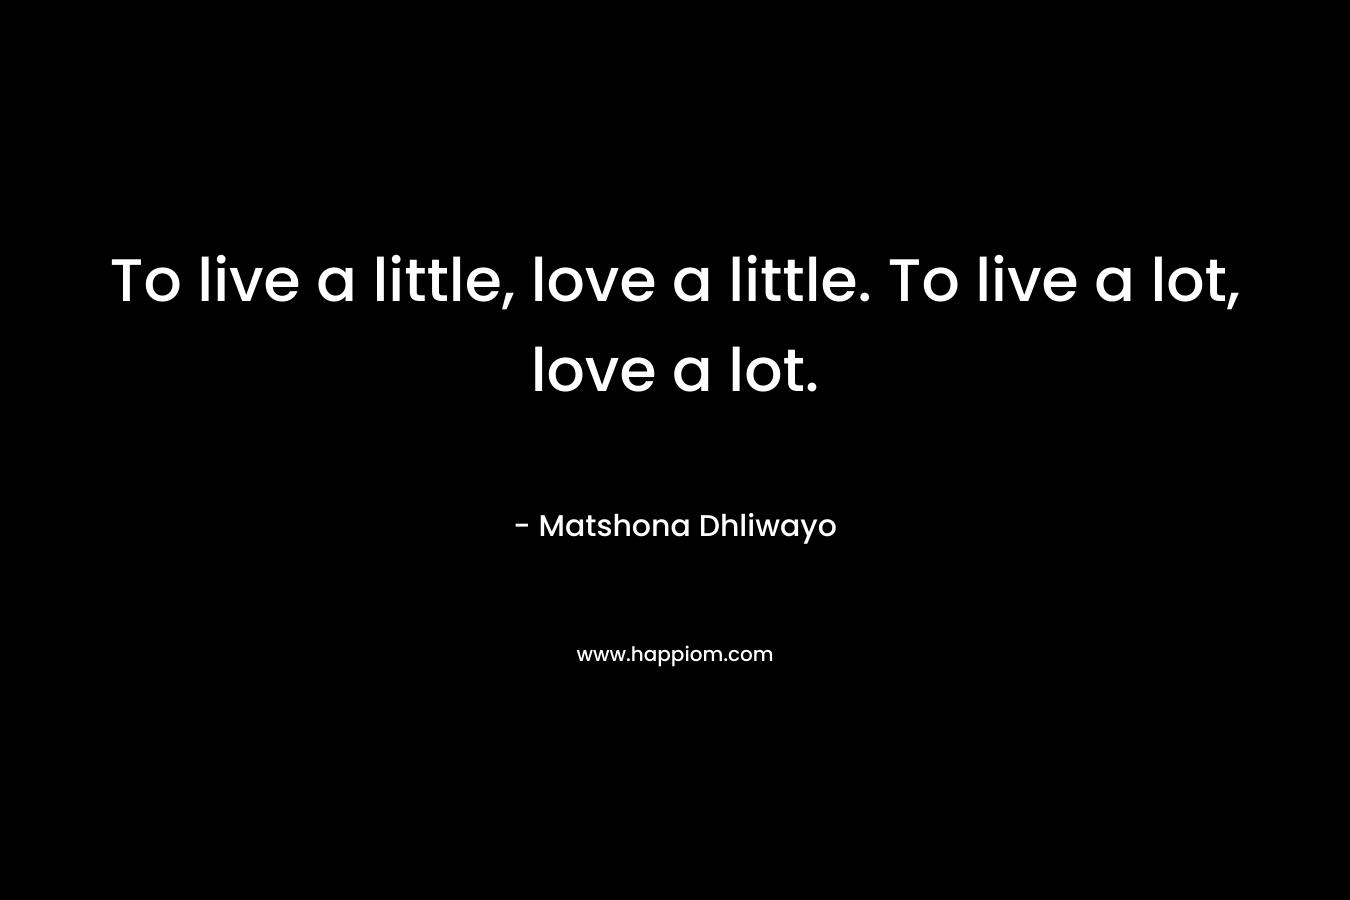 To live a little, love a little. To live a lot, love a lot.